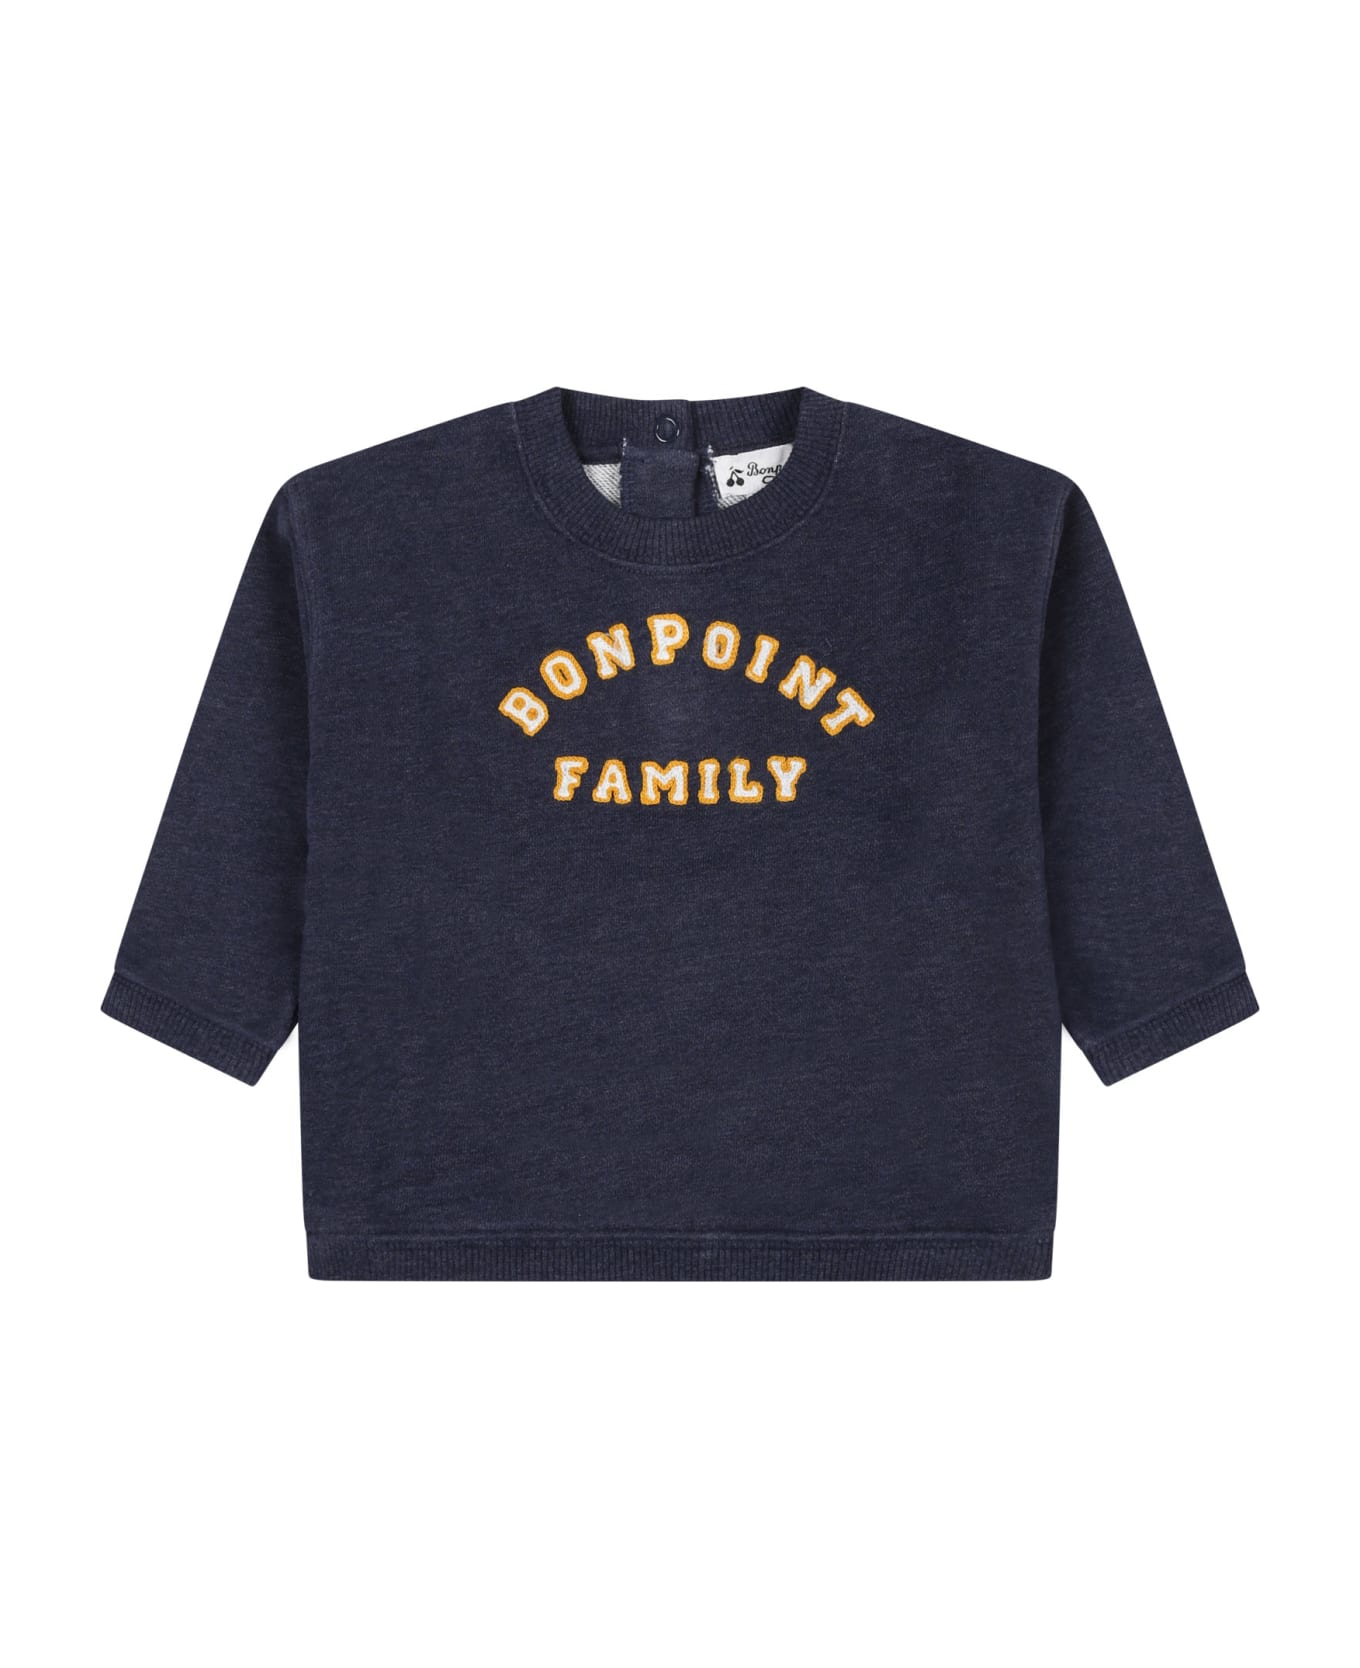 Bonpoint Blue Sweatshirt For Baby Kids With Logo - Blue